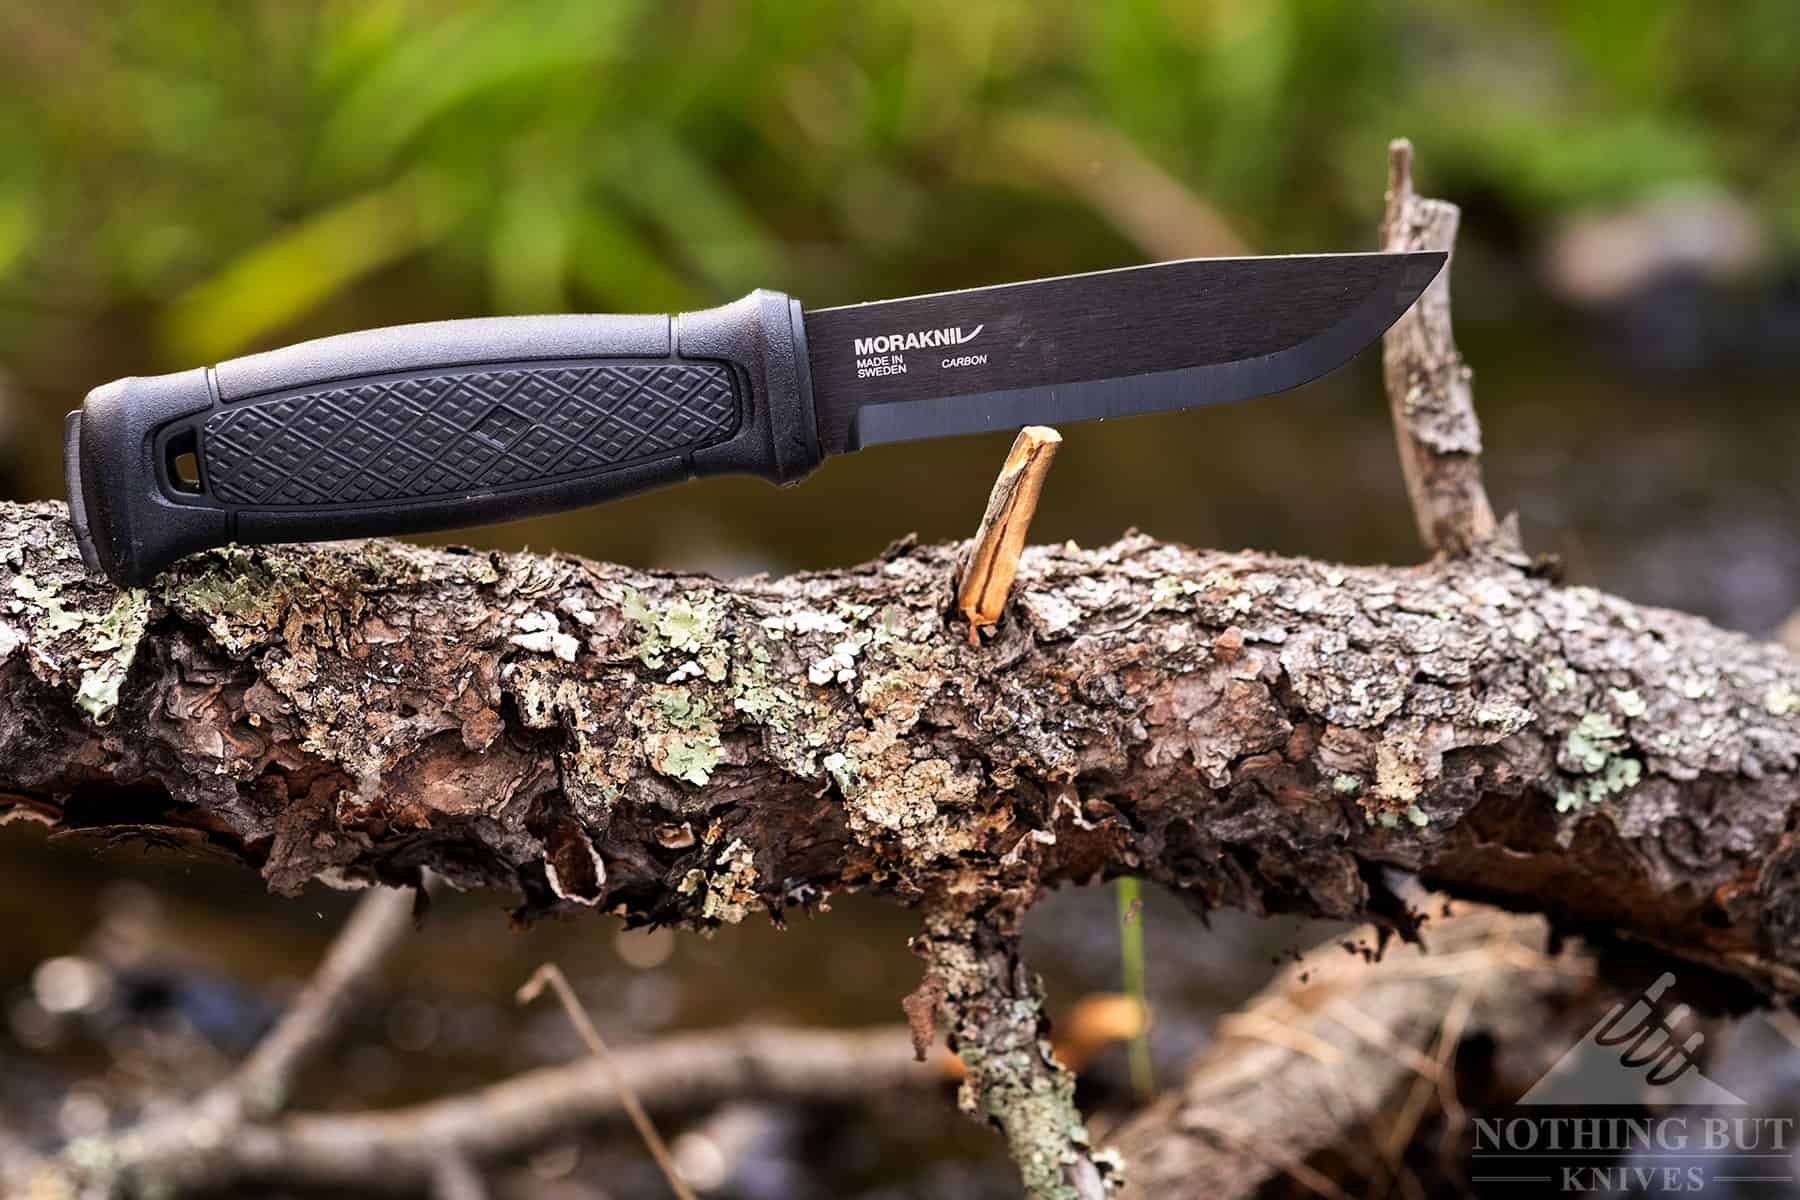 The Mora Garburg offers a lot of value from a performance and durability standpoint. 